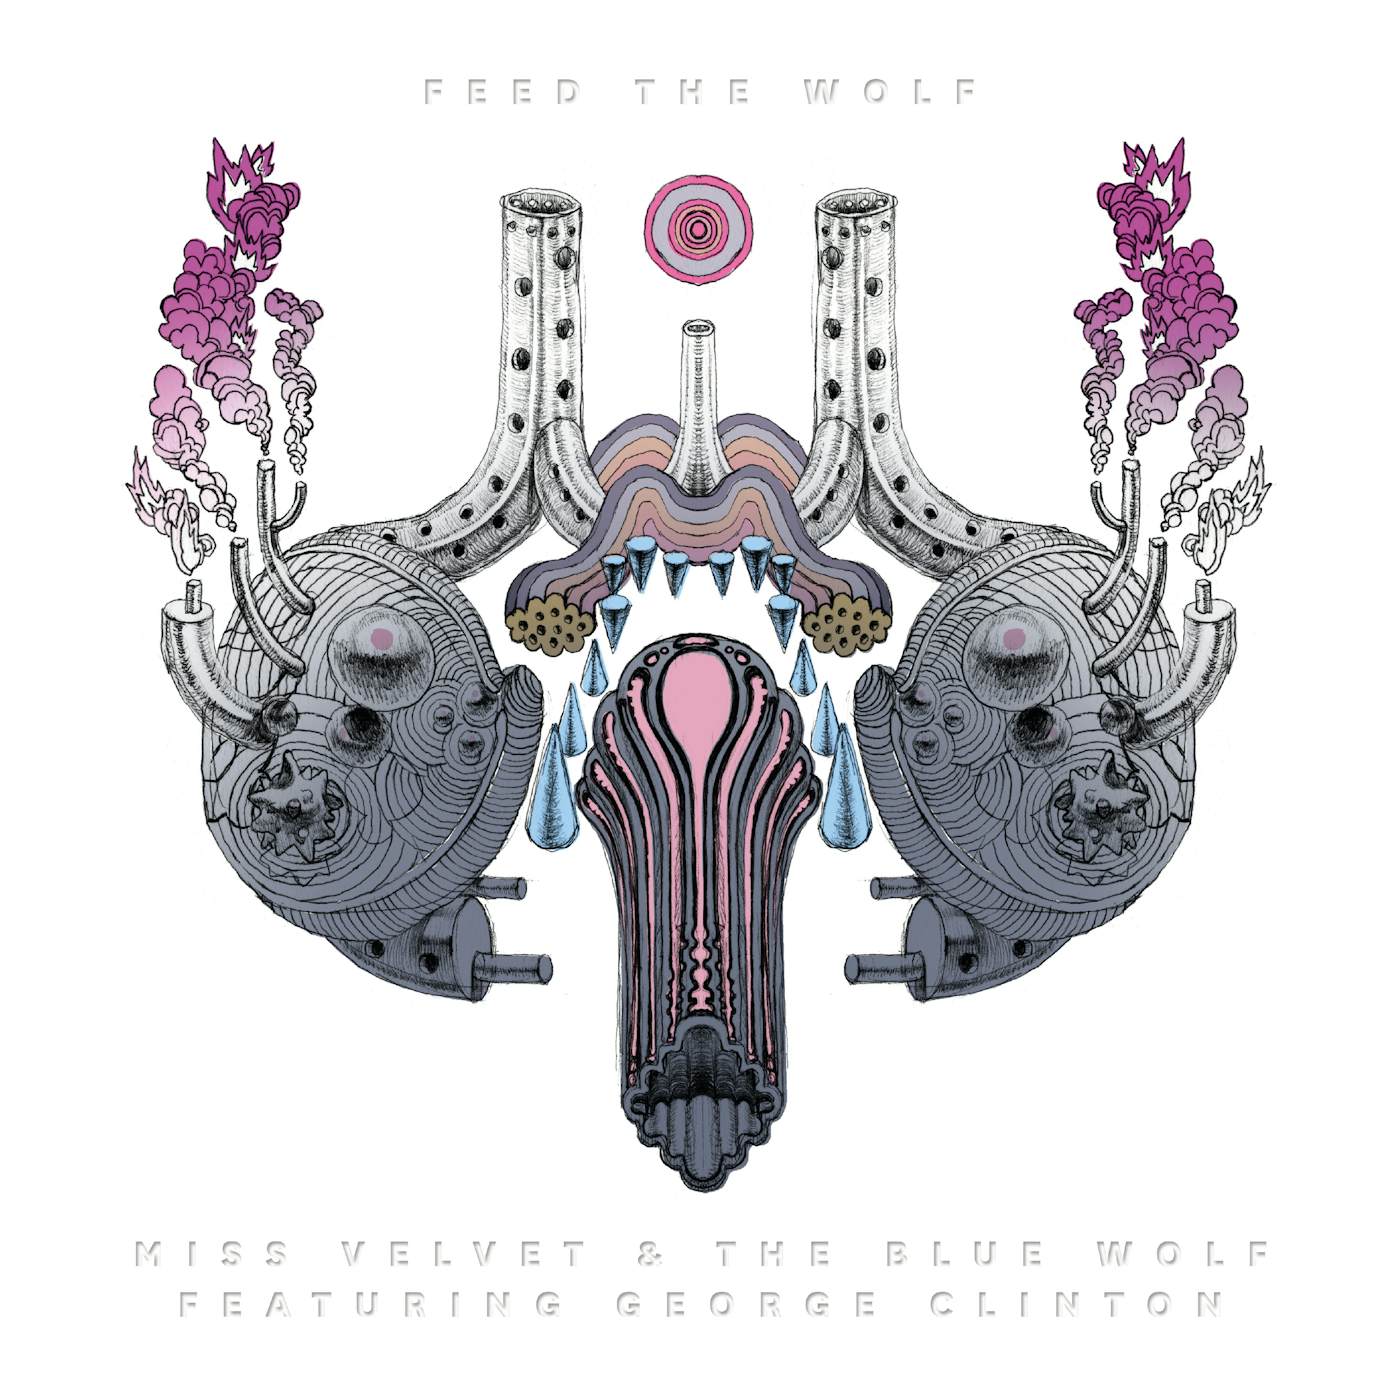 Feed The Wolf / Various FEED THE WOLF Vinyl Record